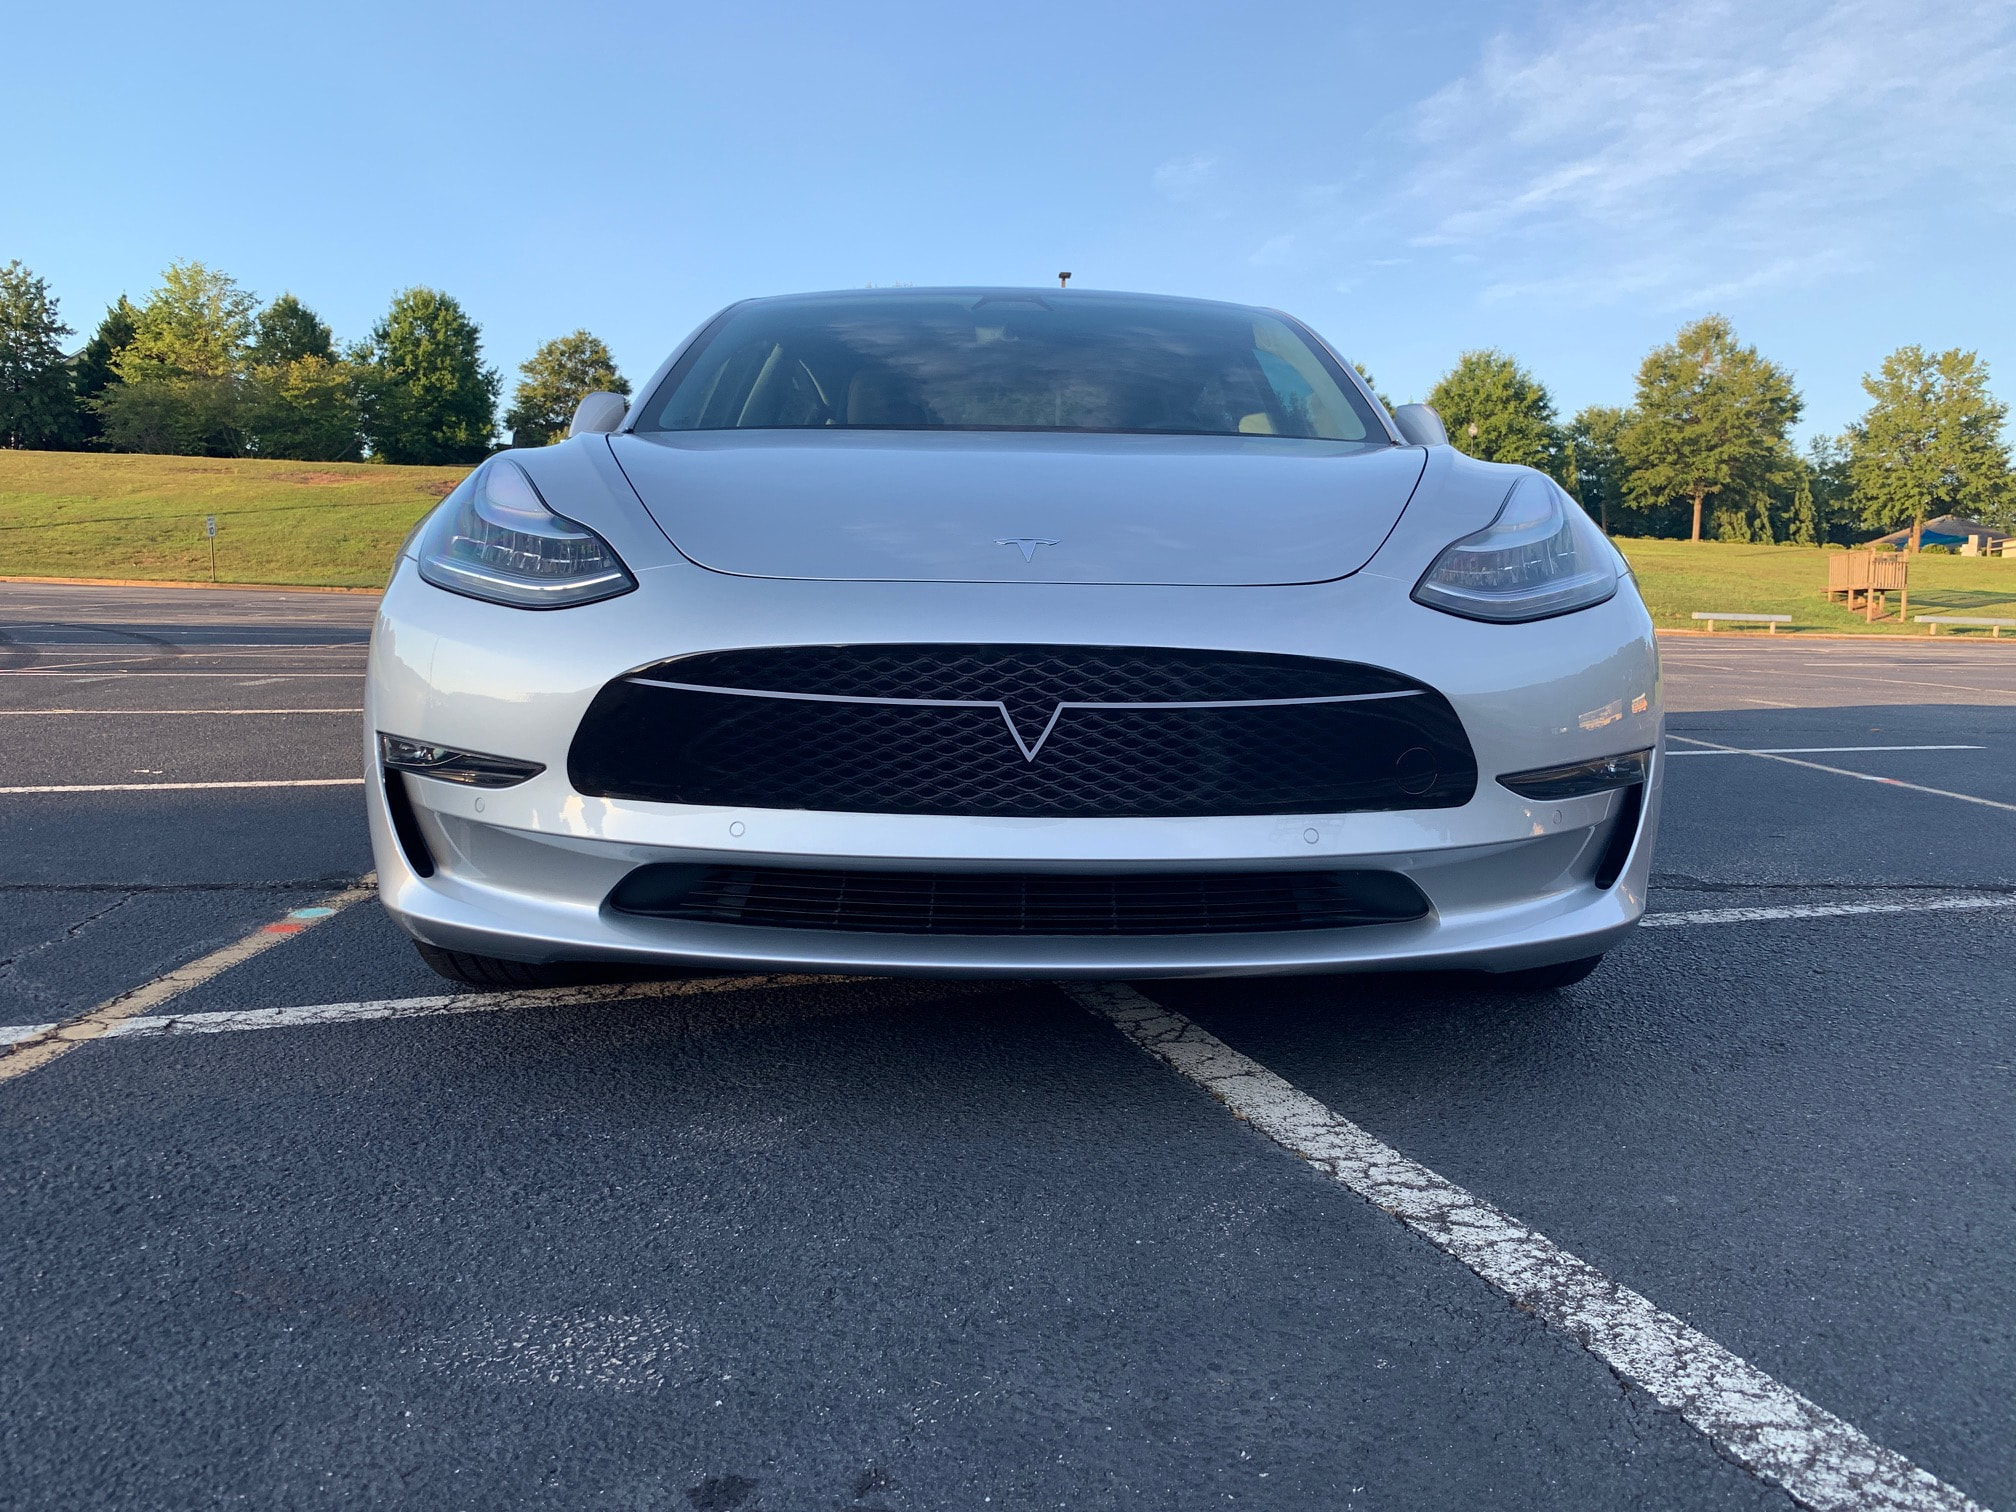 New--Tesla Model 3 Grille- 18 - Temple Performance Cars